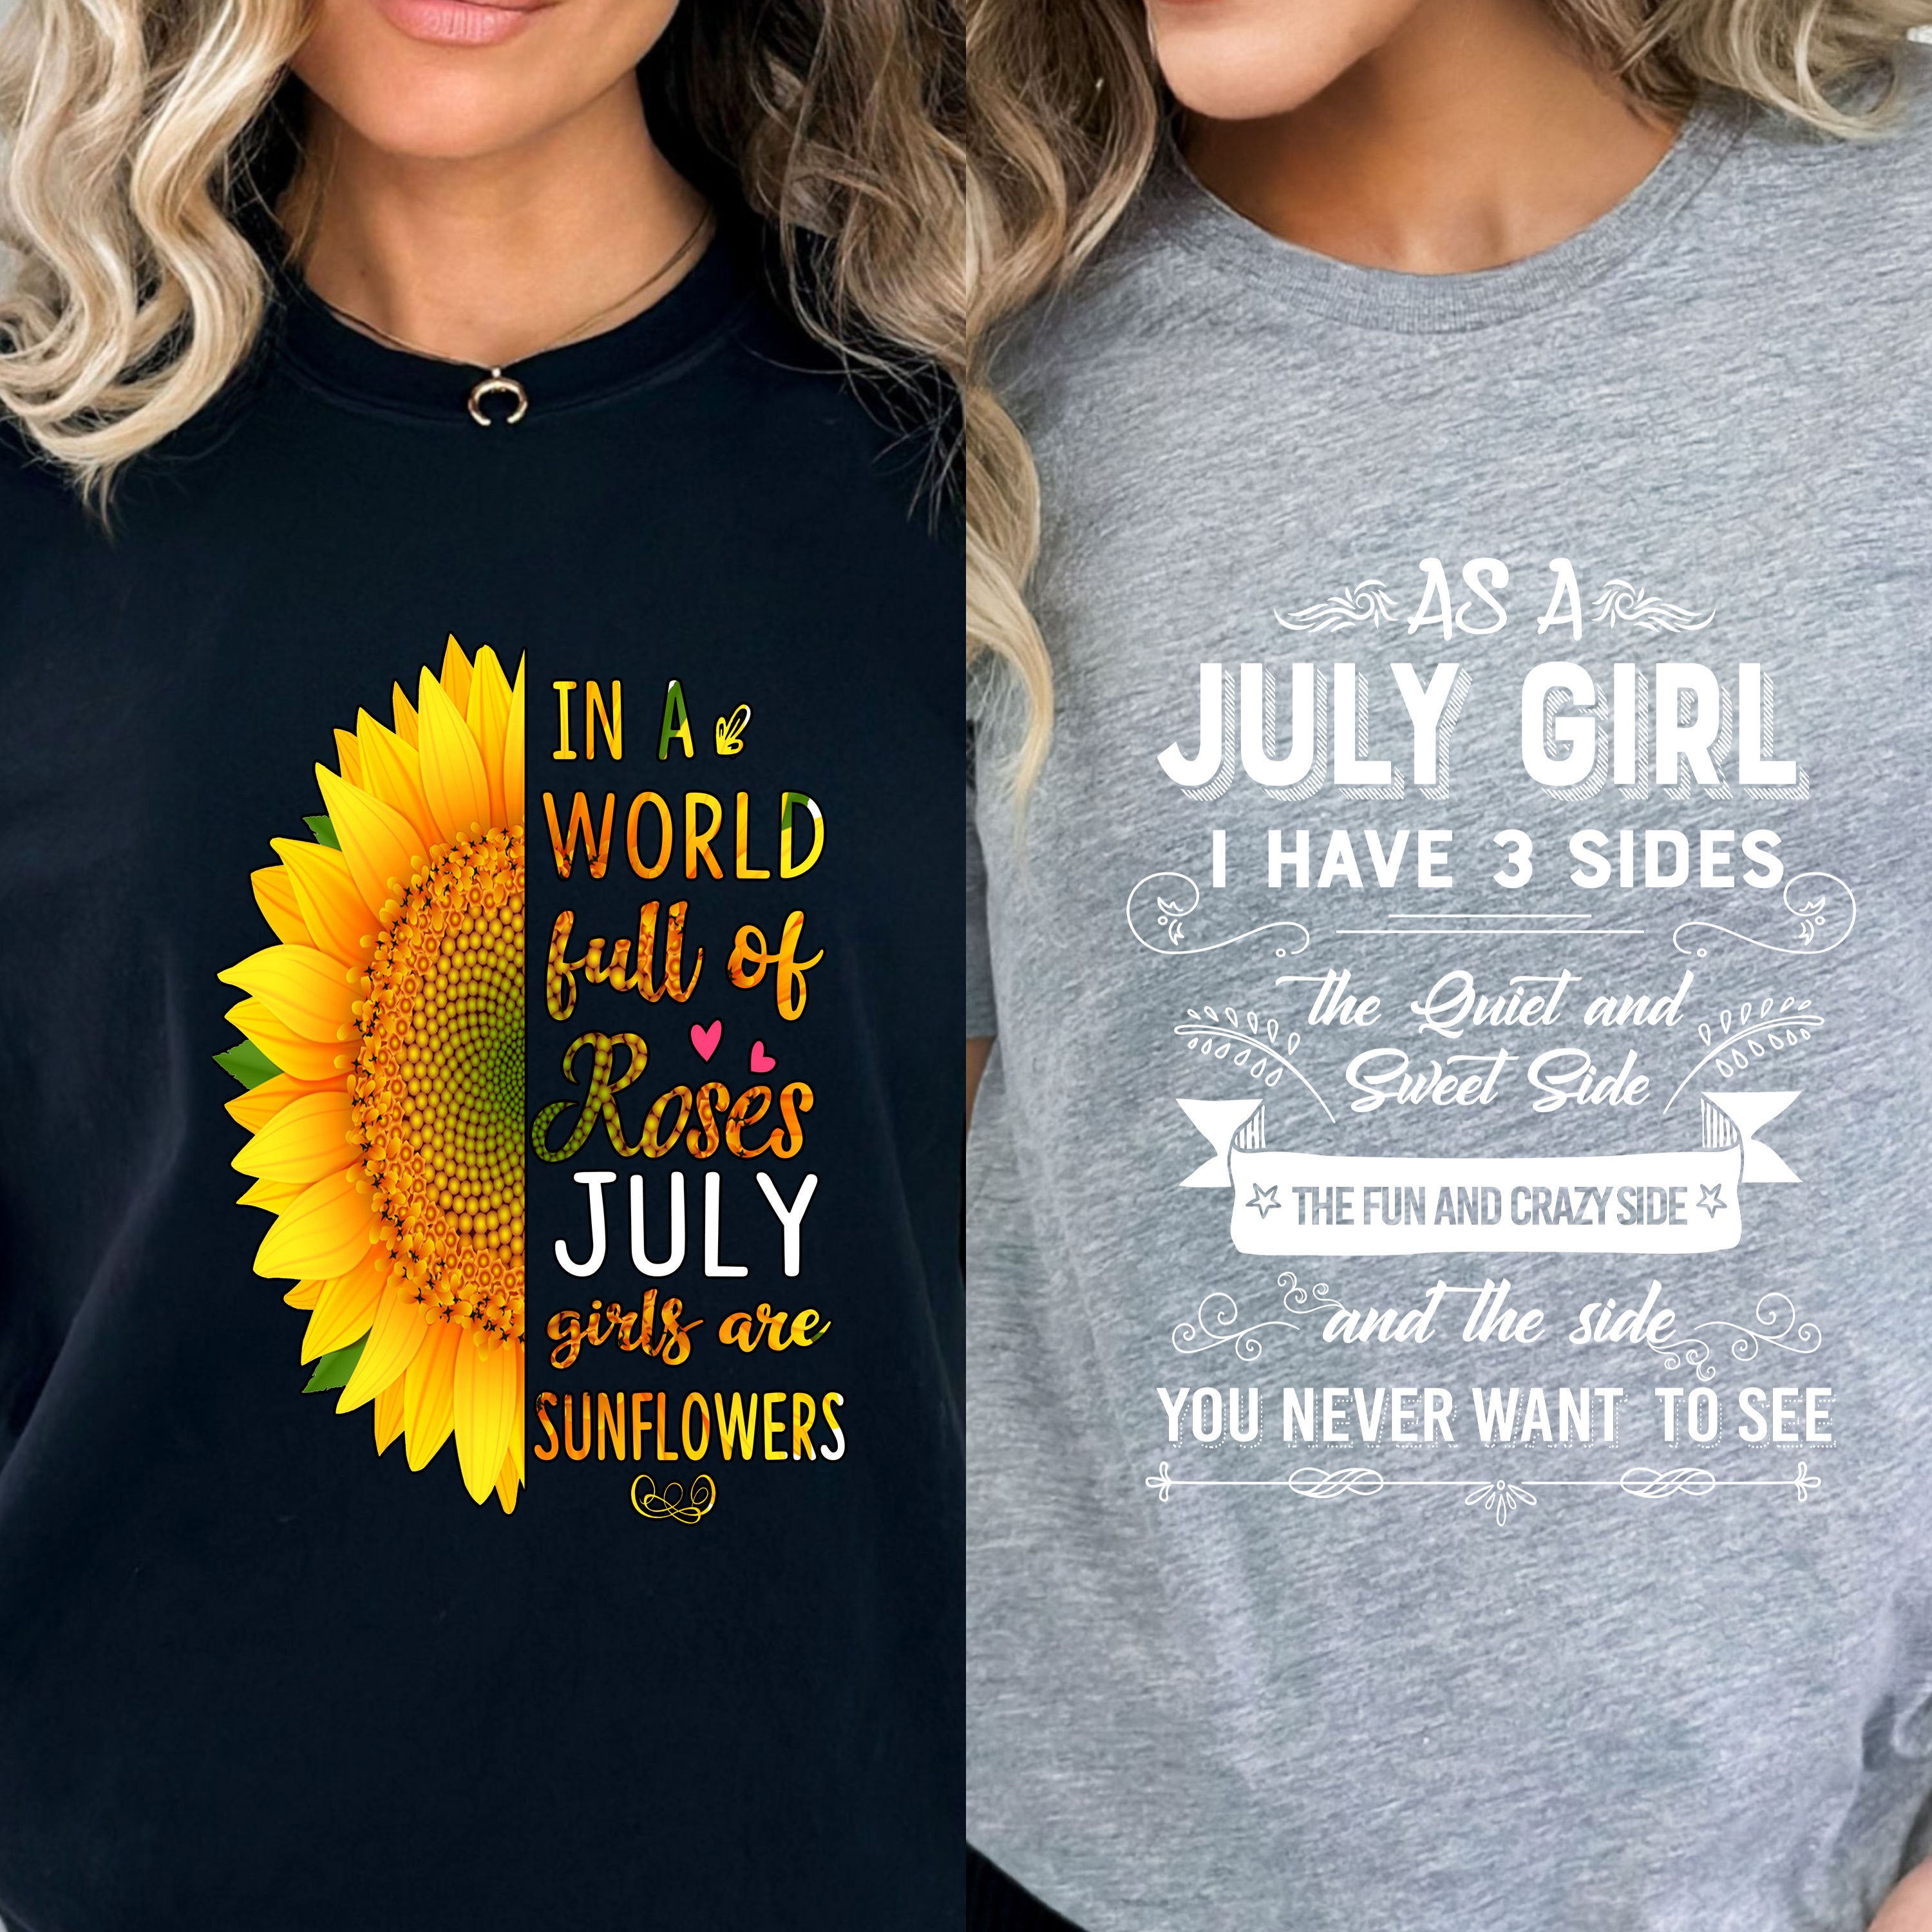 "July Combo (Sunflower And 3 Sides)" Pack of 2 Shirts